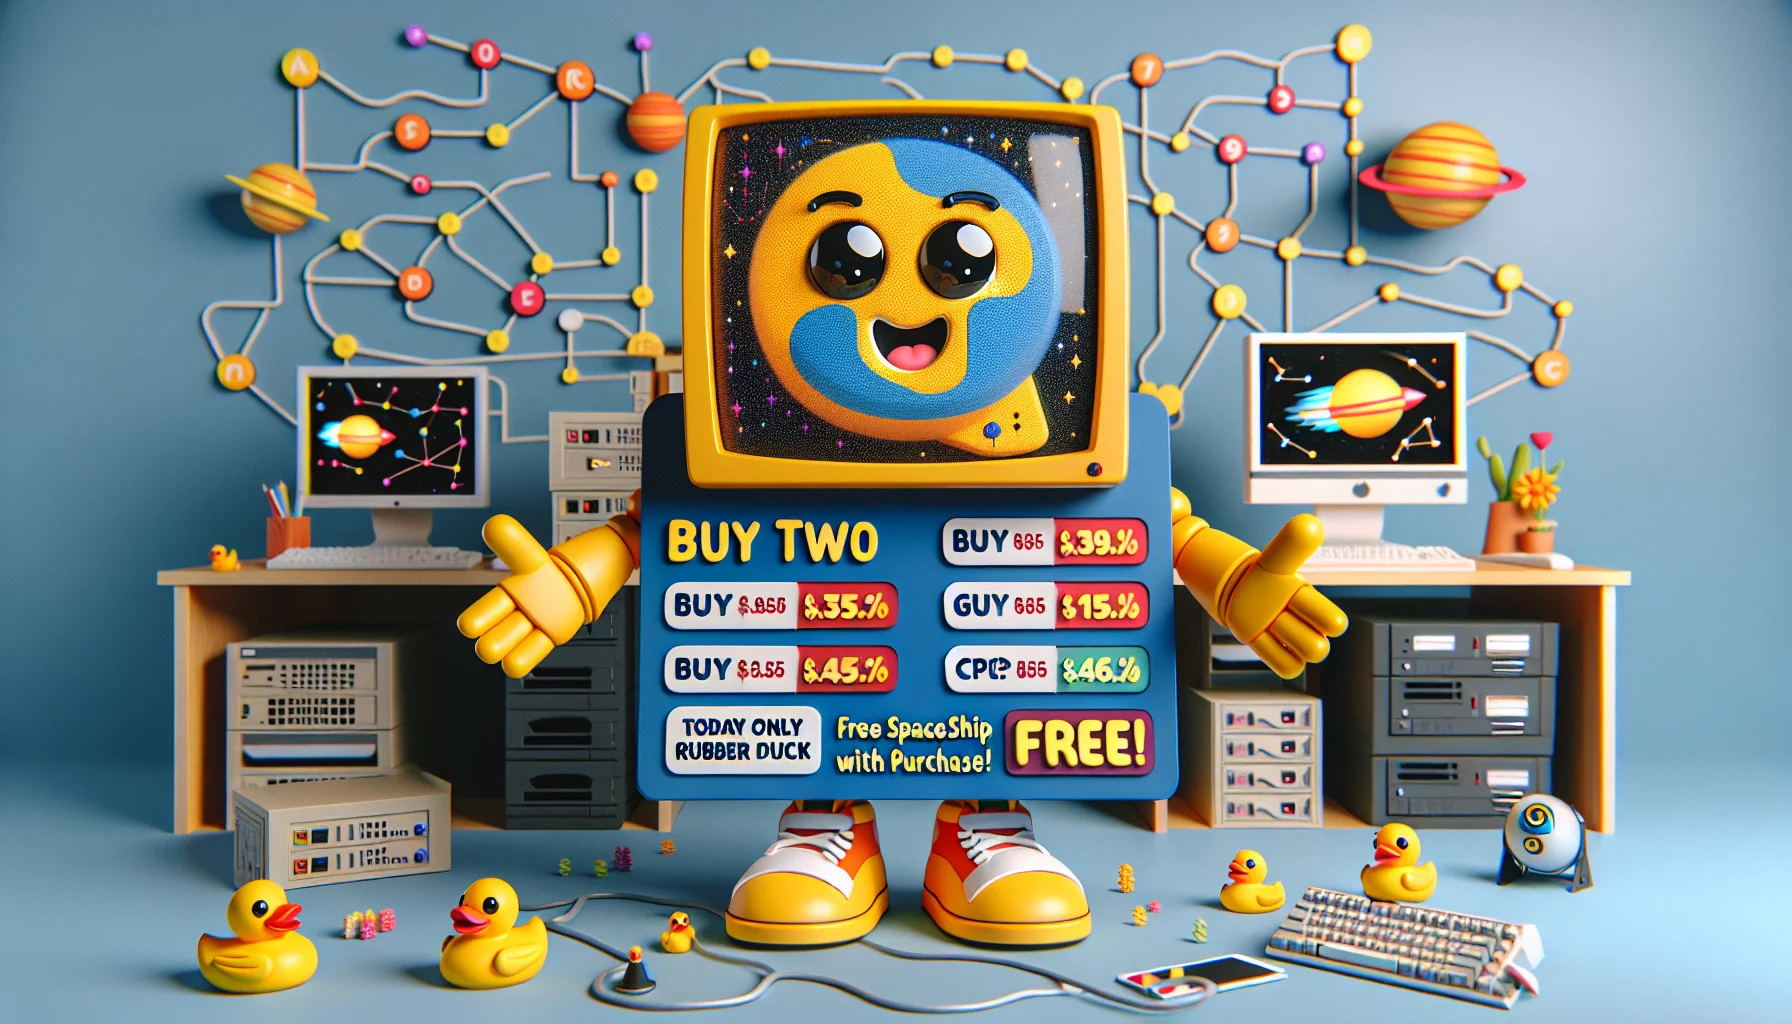 Create a humorous image of a friendly mascot, a cheerful yellow robot with a monitor head, presenting a big, bright, colorful signboard showing cPanel pricing. The signboard is packed with quirky, unexpected discounts such as 'Buy two, get a rubber duck free!' and 'Today only, free spaceship rides with purchase!' The background setting is a playful internet space-themed office environment with desktop computers resembling tiny planets, keyboard sequences connecting like constellation patterns, and cable wires looping around like rocket trajectories.